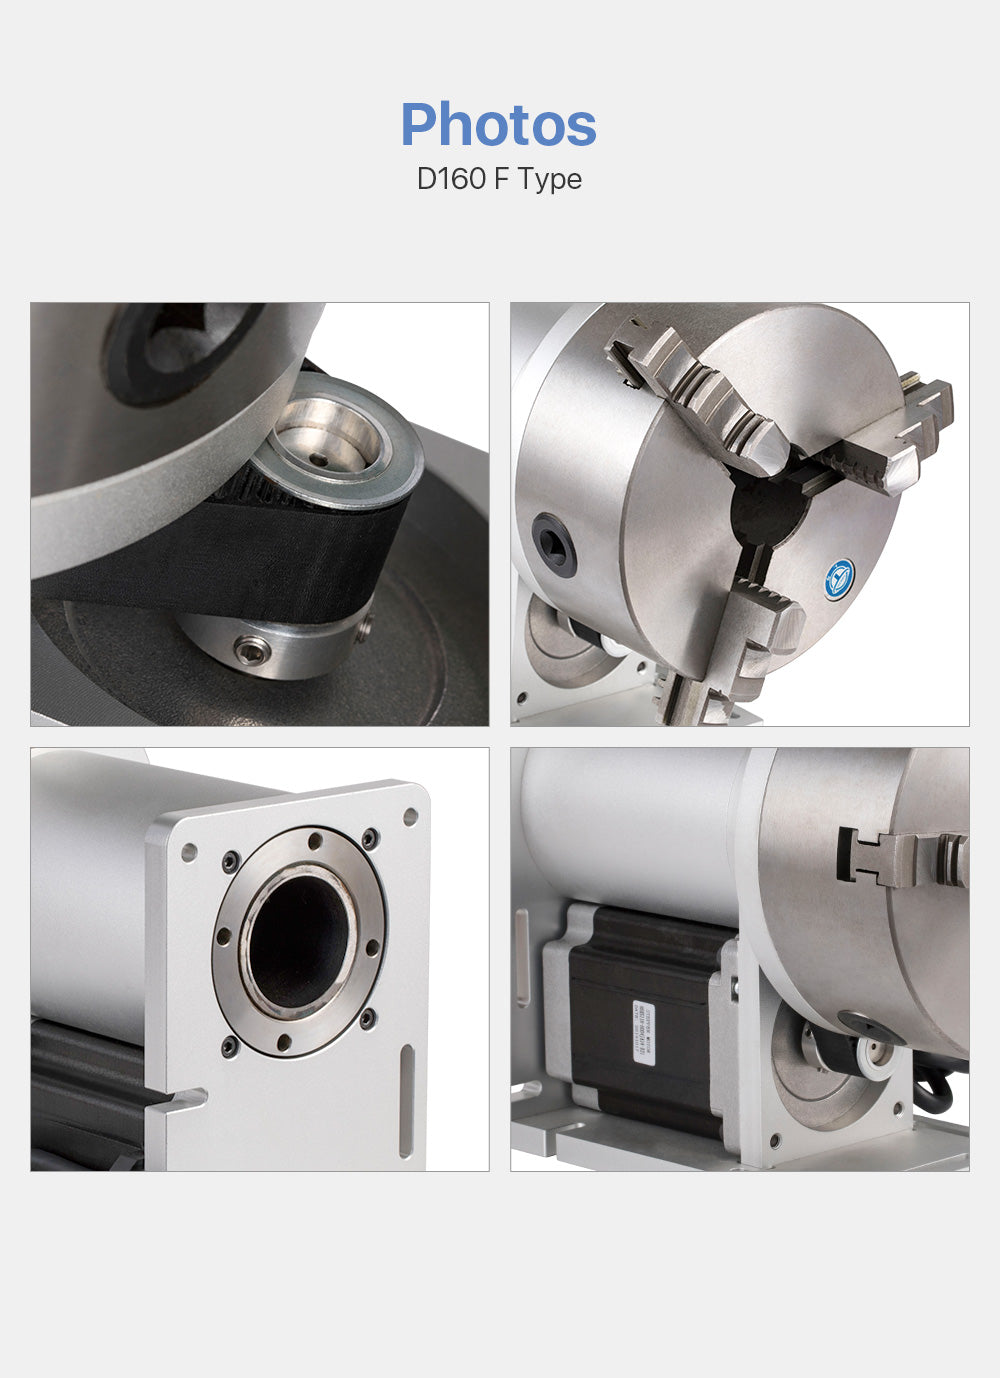 Rotary Attachment Diameter160mm Nema34 Motor and Driver for Cuboid Objects Circular Fiber Marking Machine